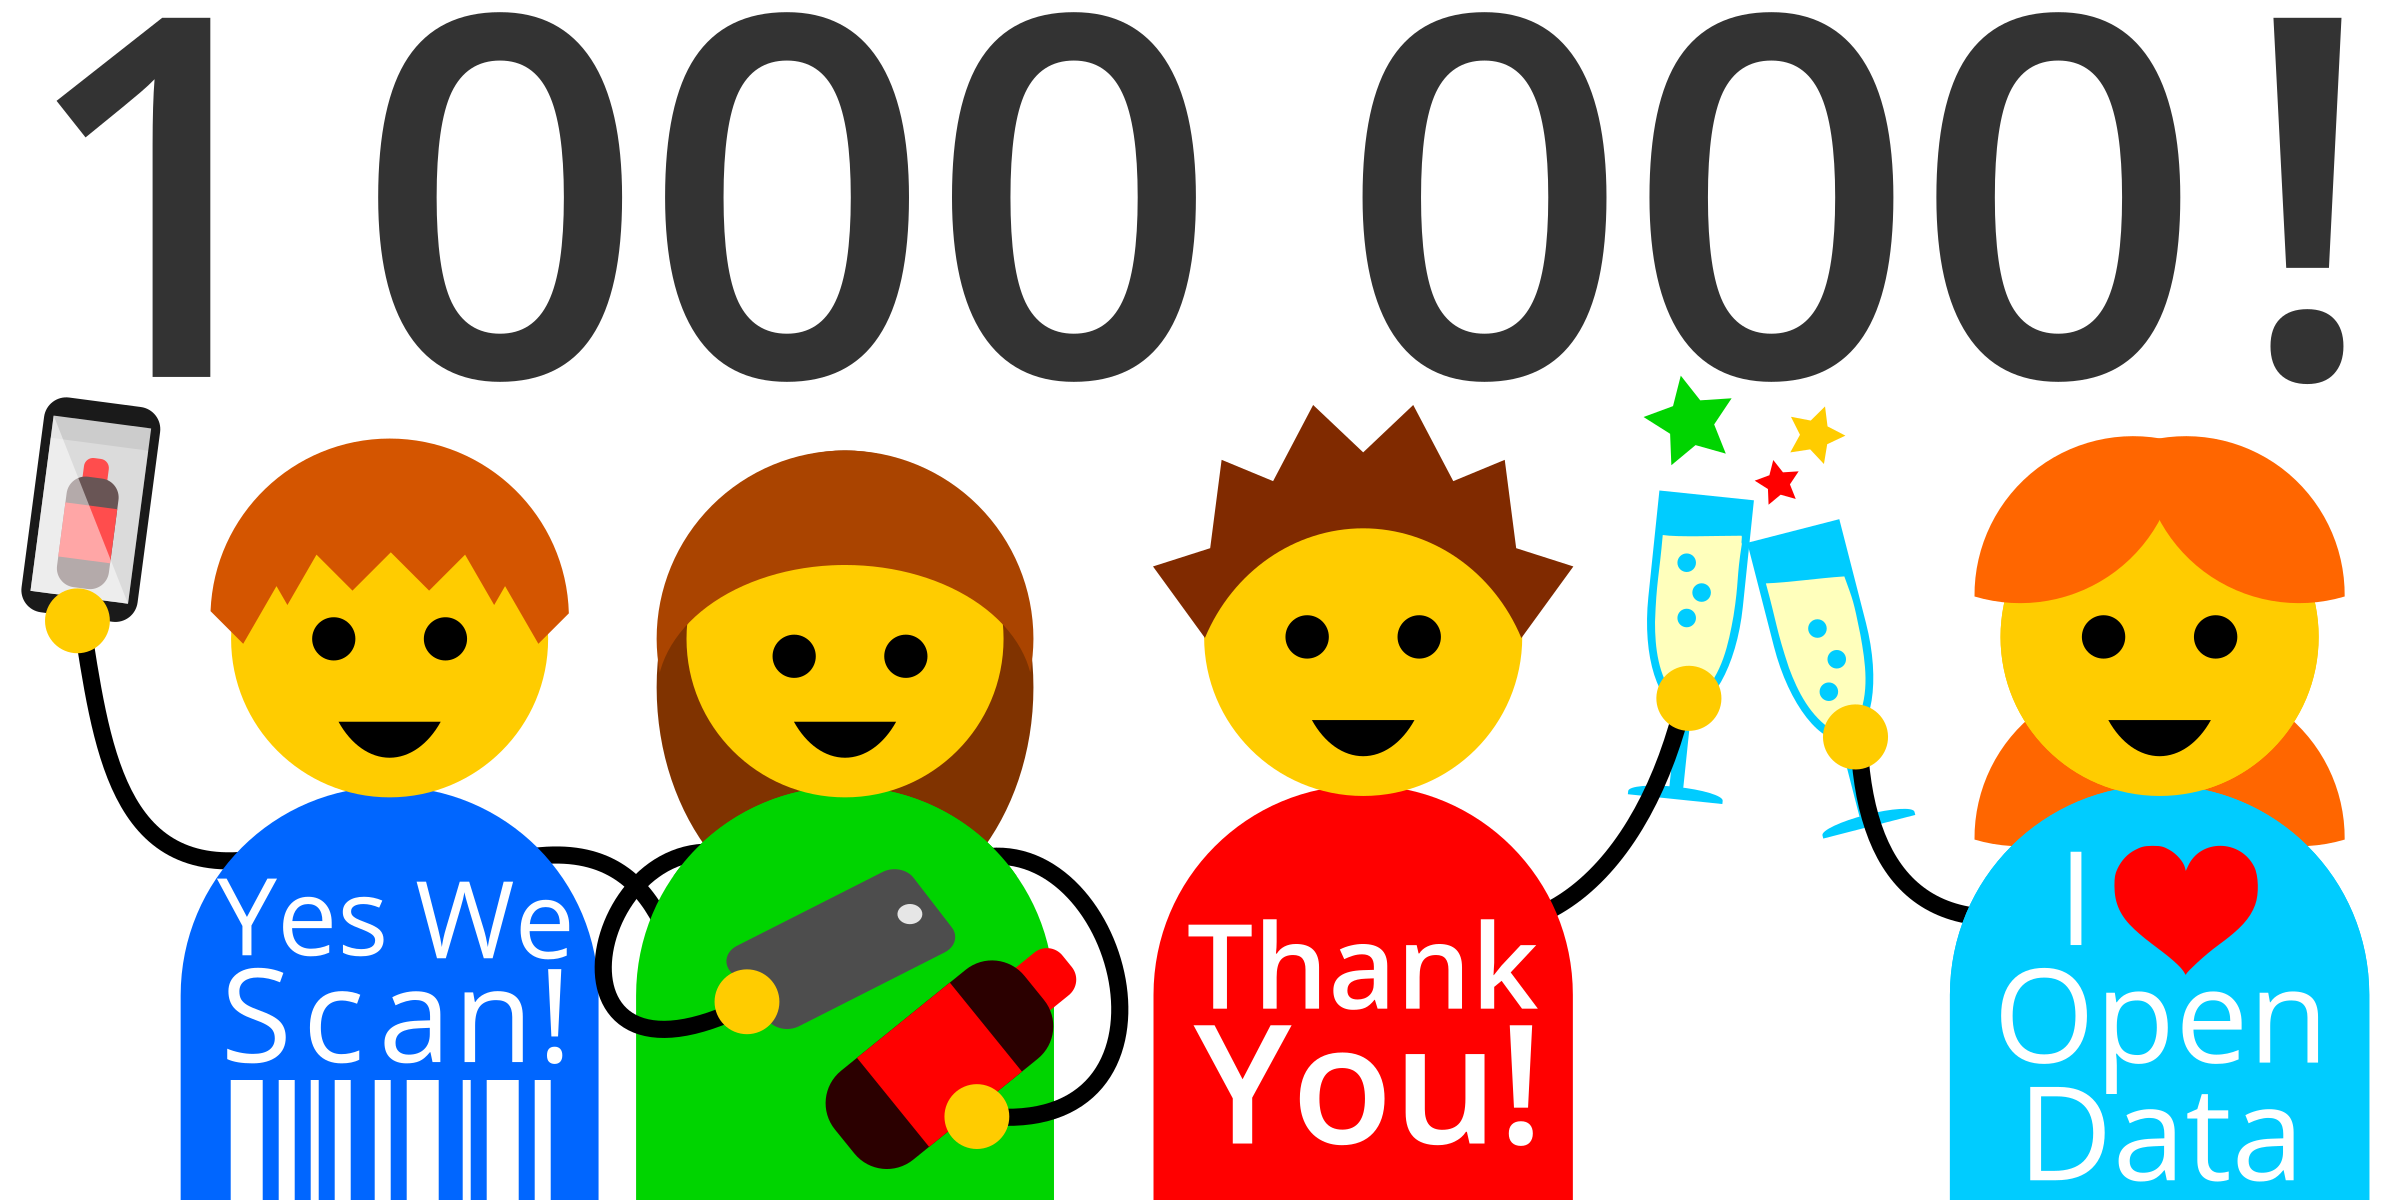 1 million products and 1 million thanks!